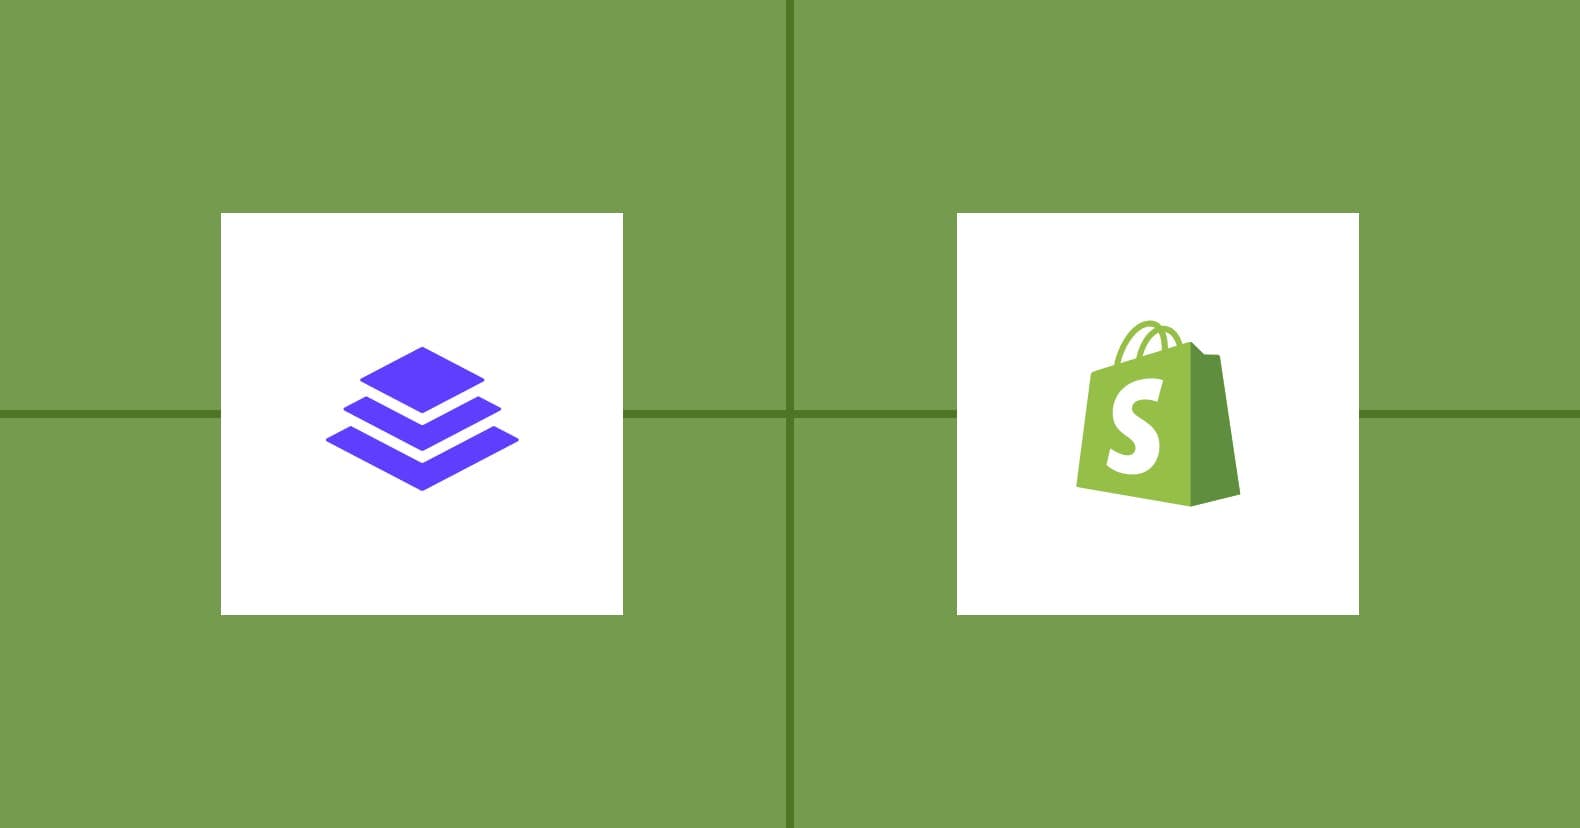 Use Leadpages and Shopify to make sales